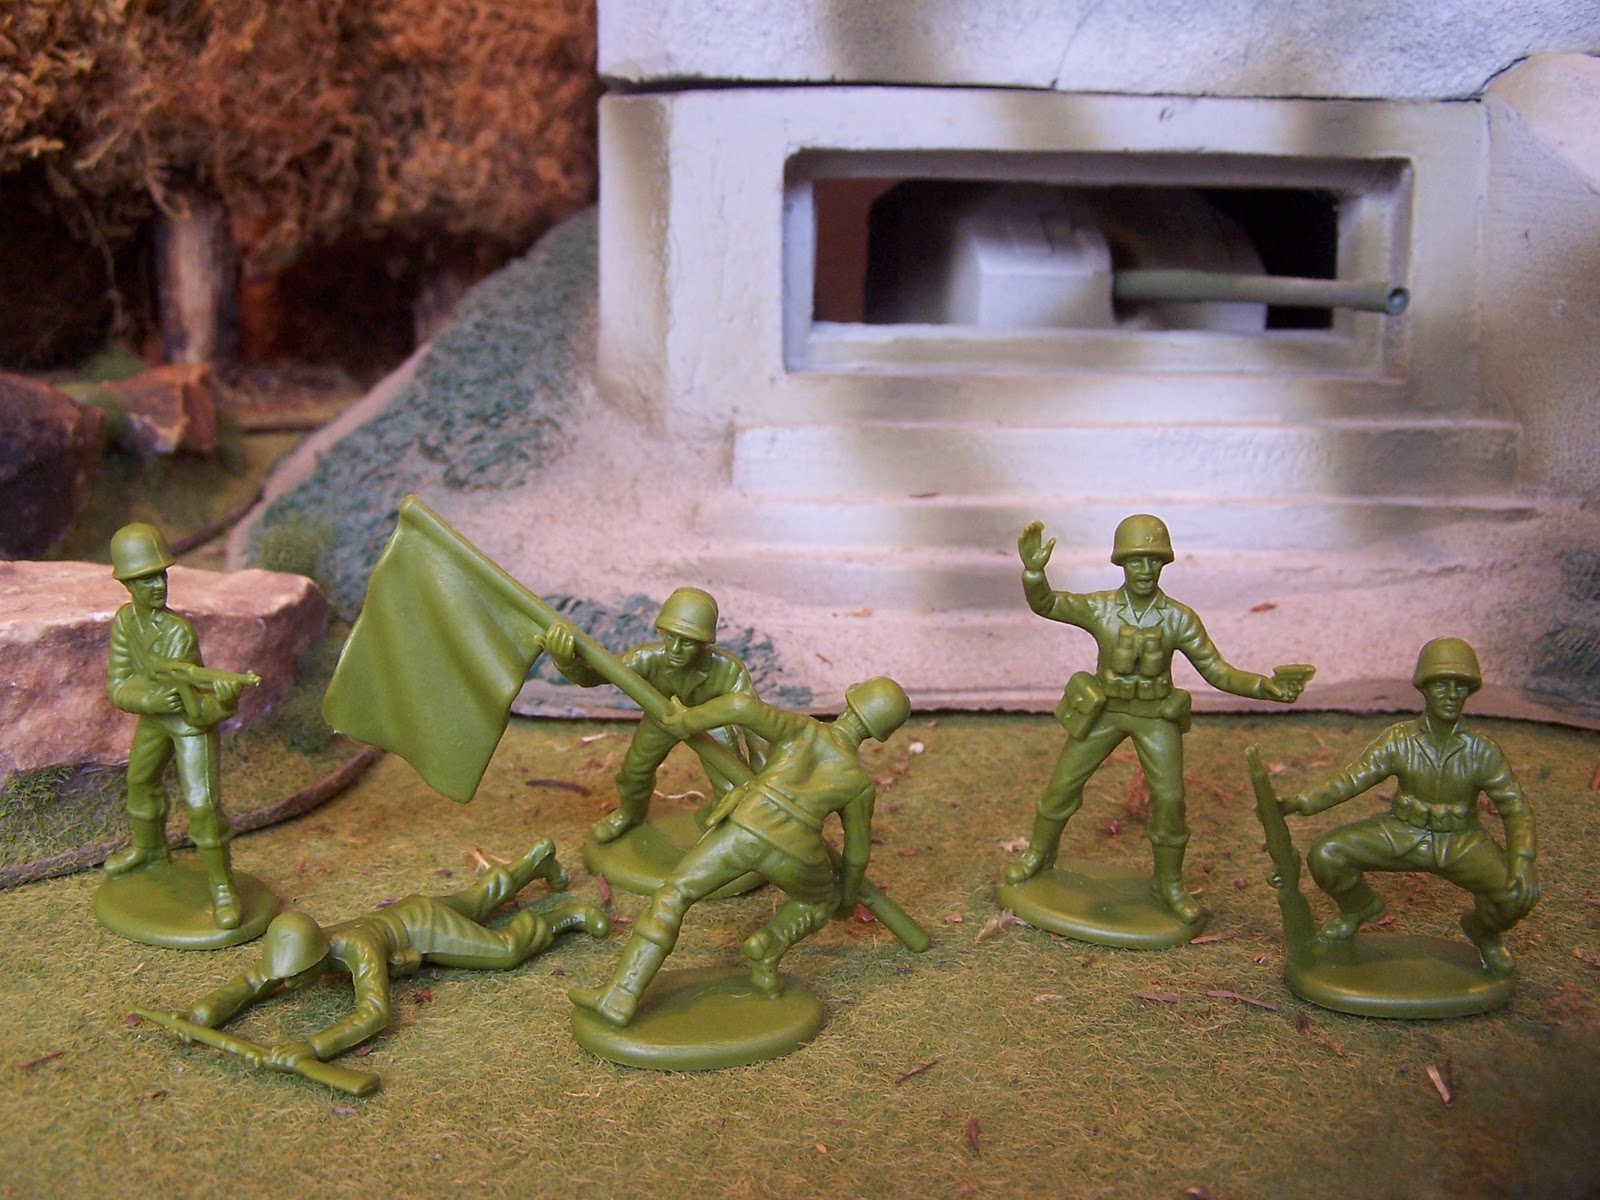 WWII Plastic Toy Soldiers: Introducing the US Marines